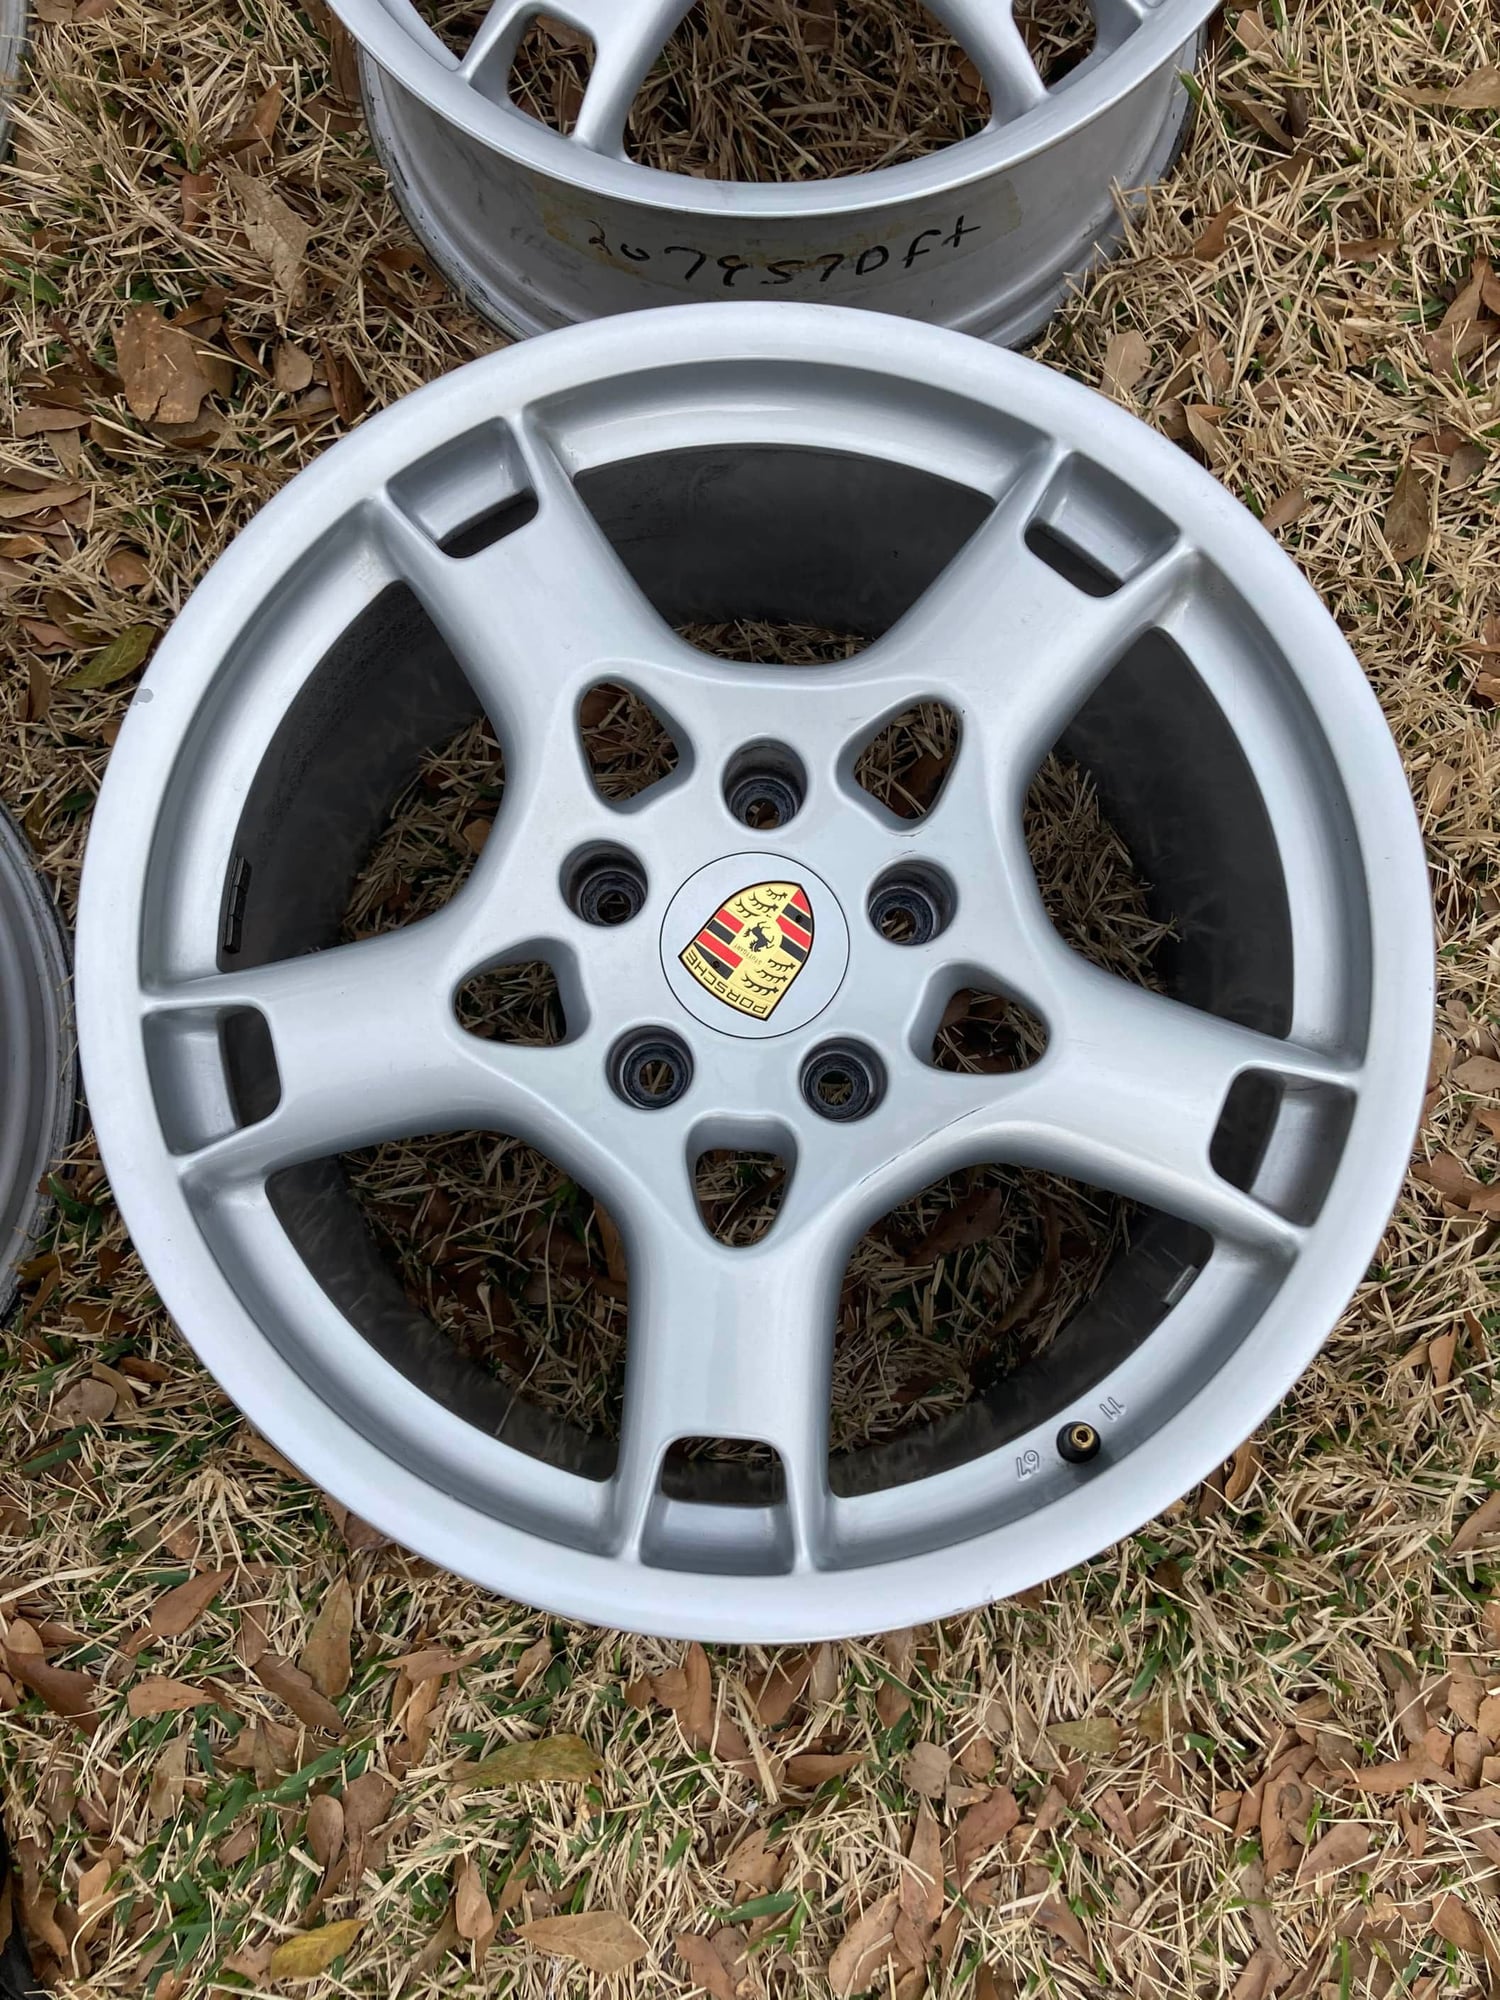 Wheels and Tires/Axles - 997 C2S OEM Wheels - Lobster - Used - 0  All Models - Spring, TX 77380, United States